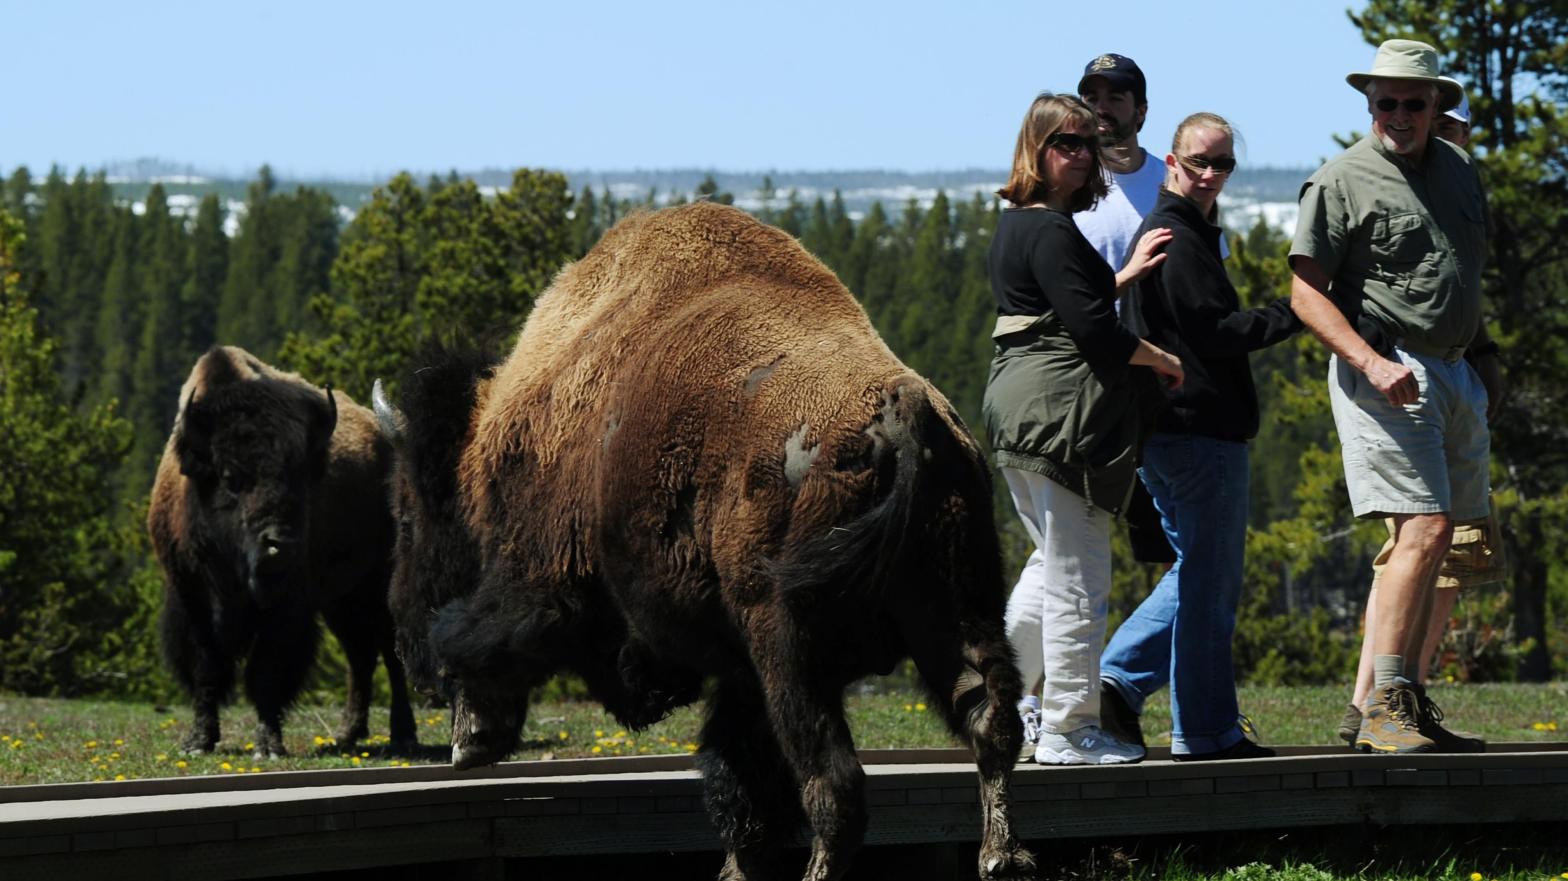 The National Parks Service advises visitors to stay 25 years (23 meters) away from wild bison. (Image: Mark Ralston, Getty Images)